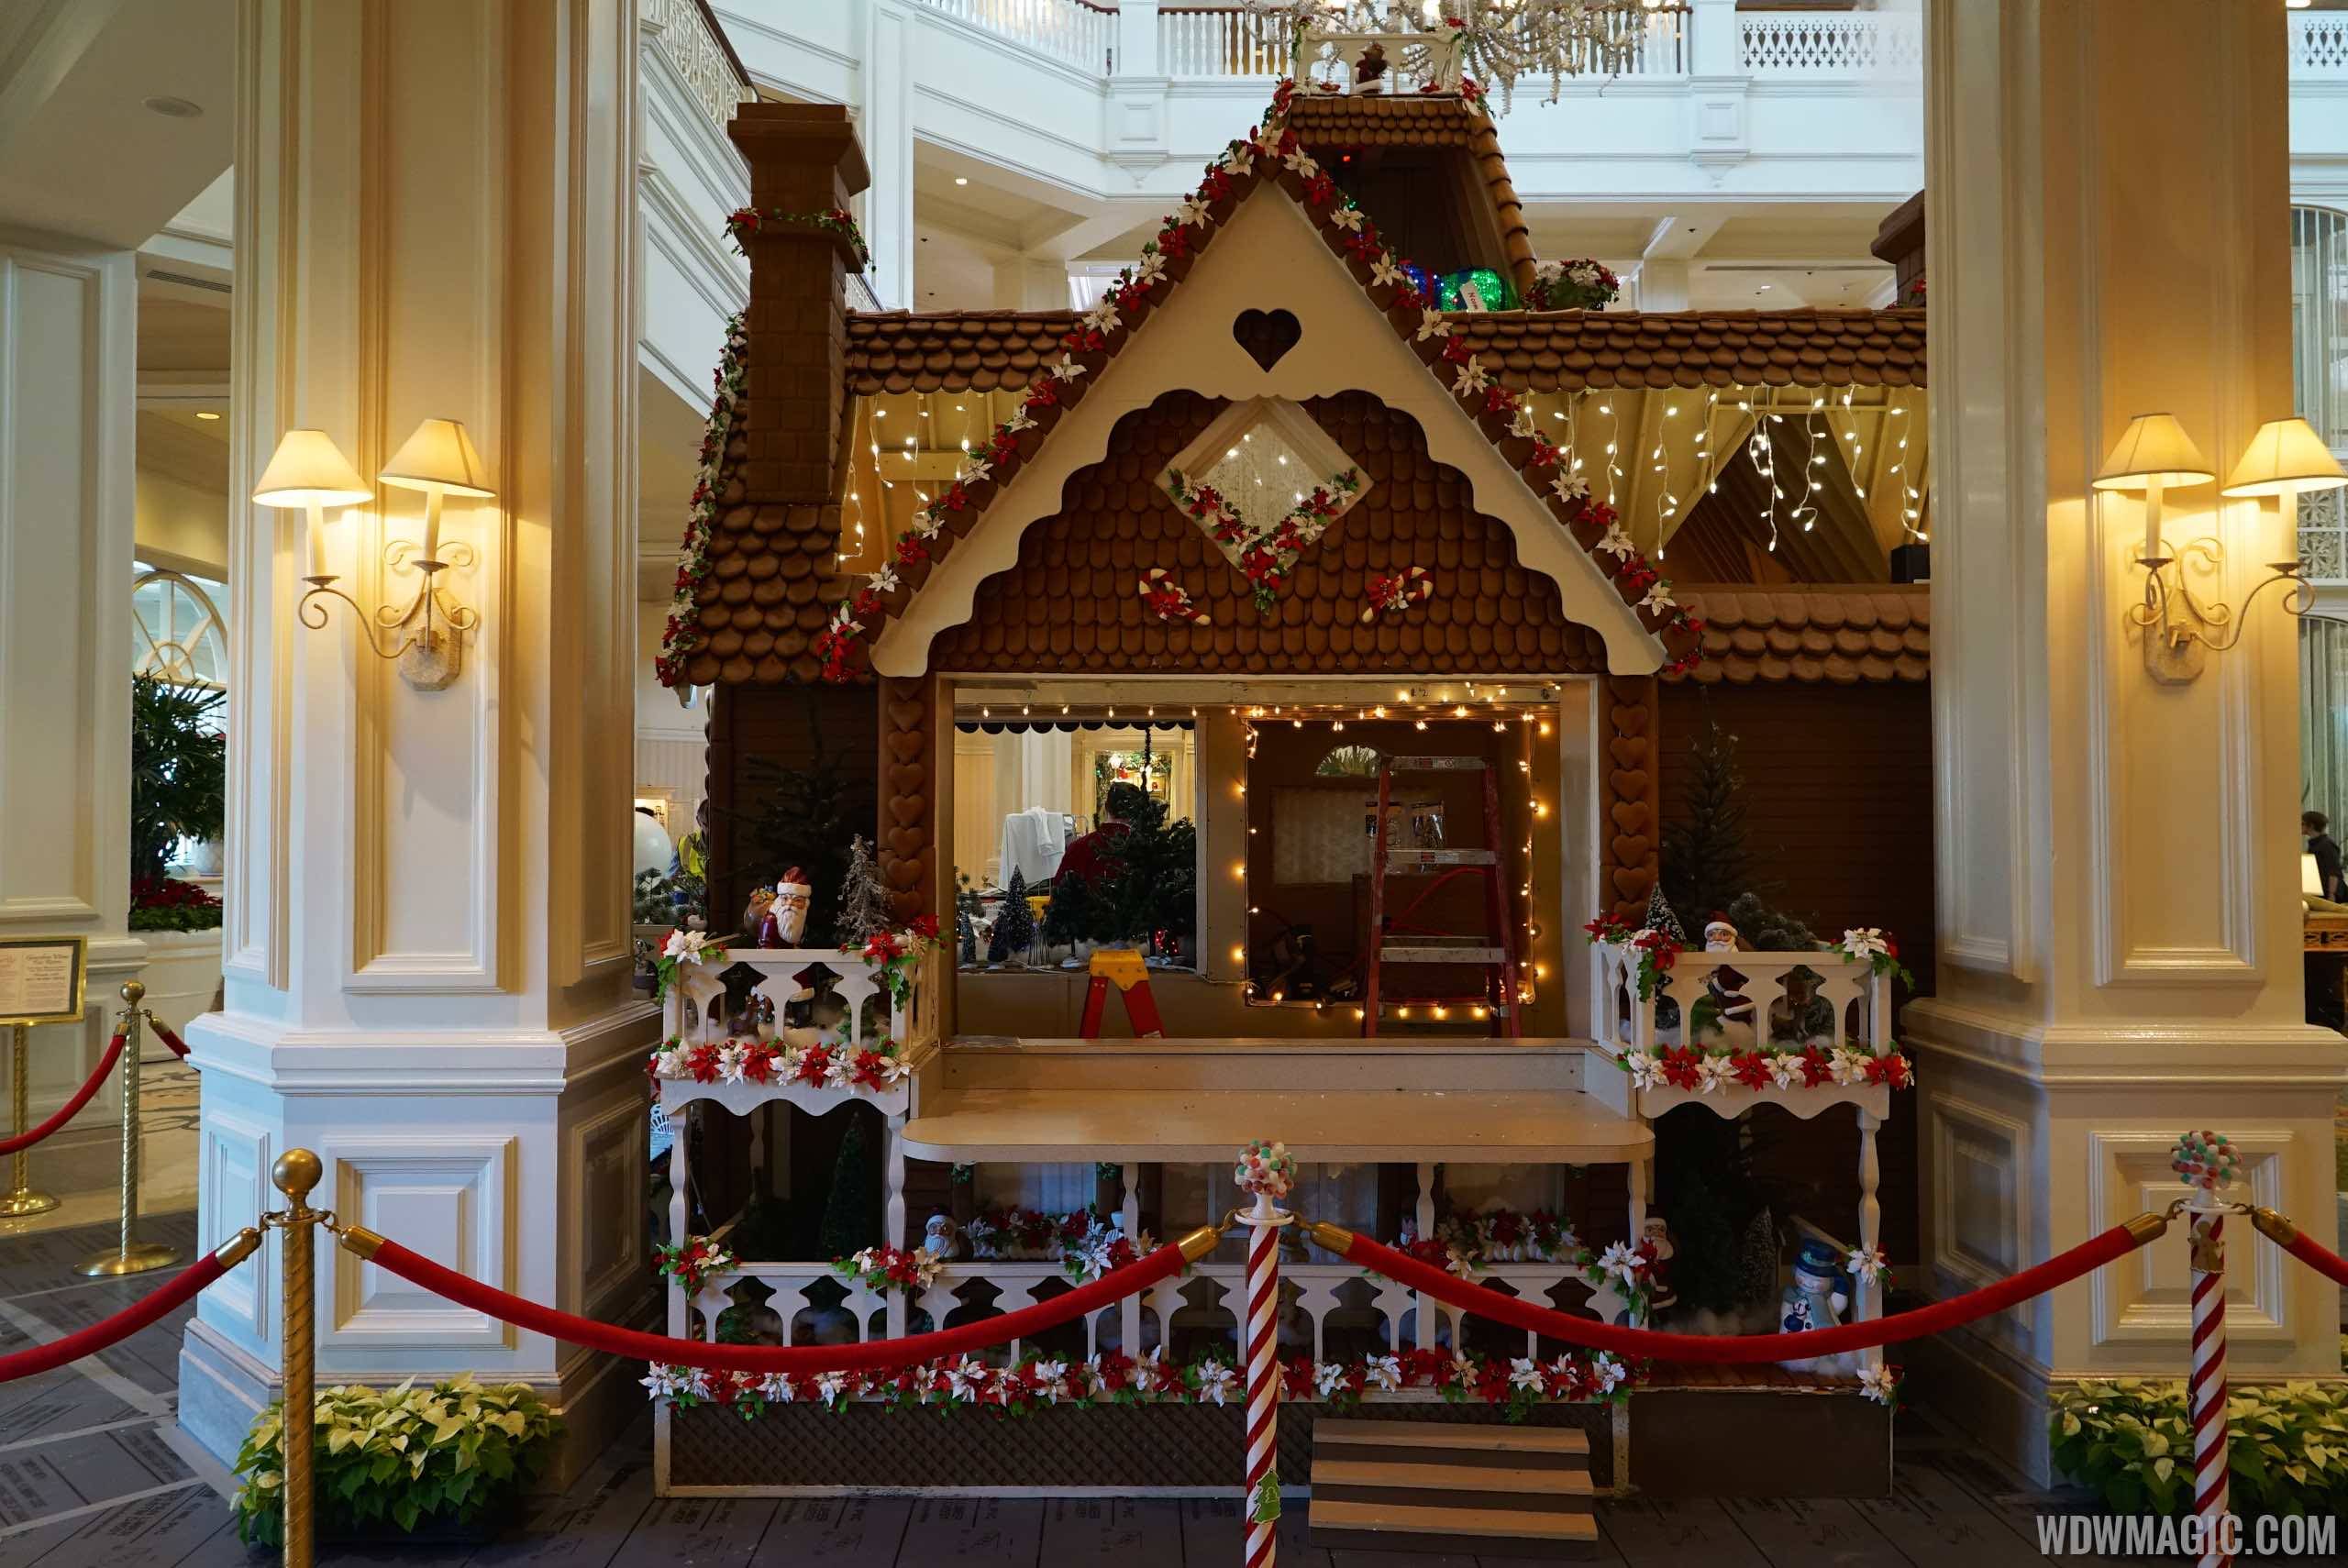 Building the 2014 Grand Floridian Gingerbread House